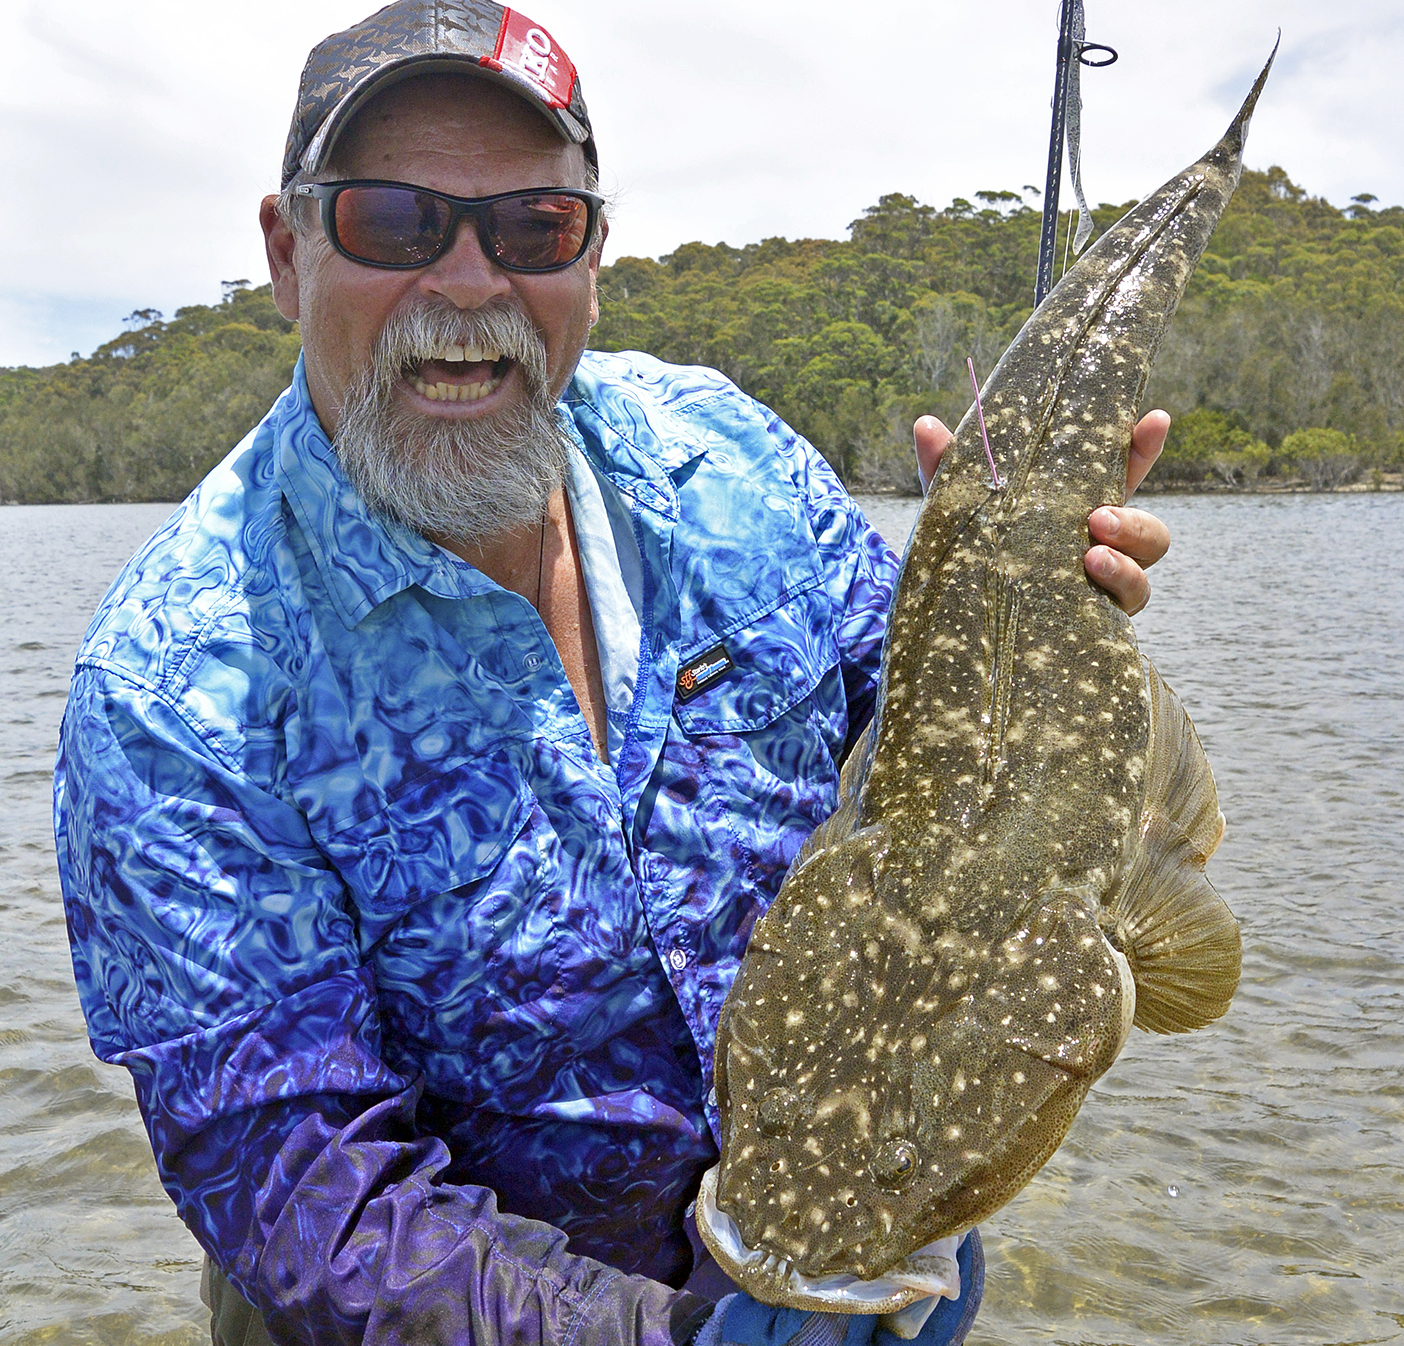 The Tuross estuary is renowned for producing large dusky flathead.